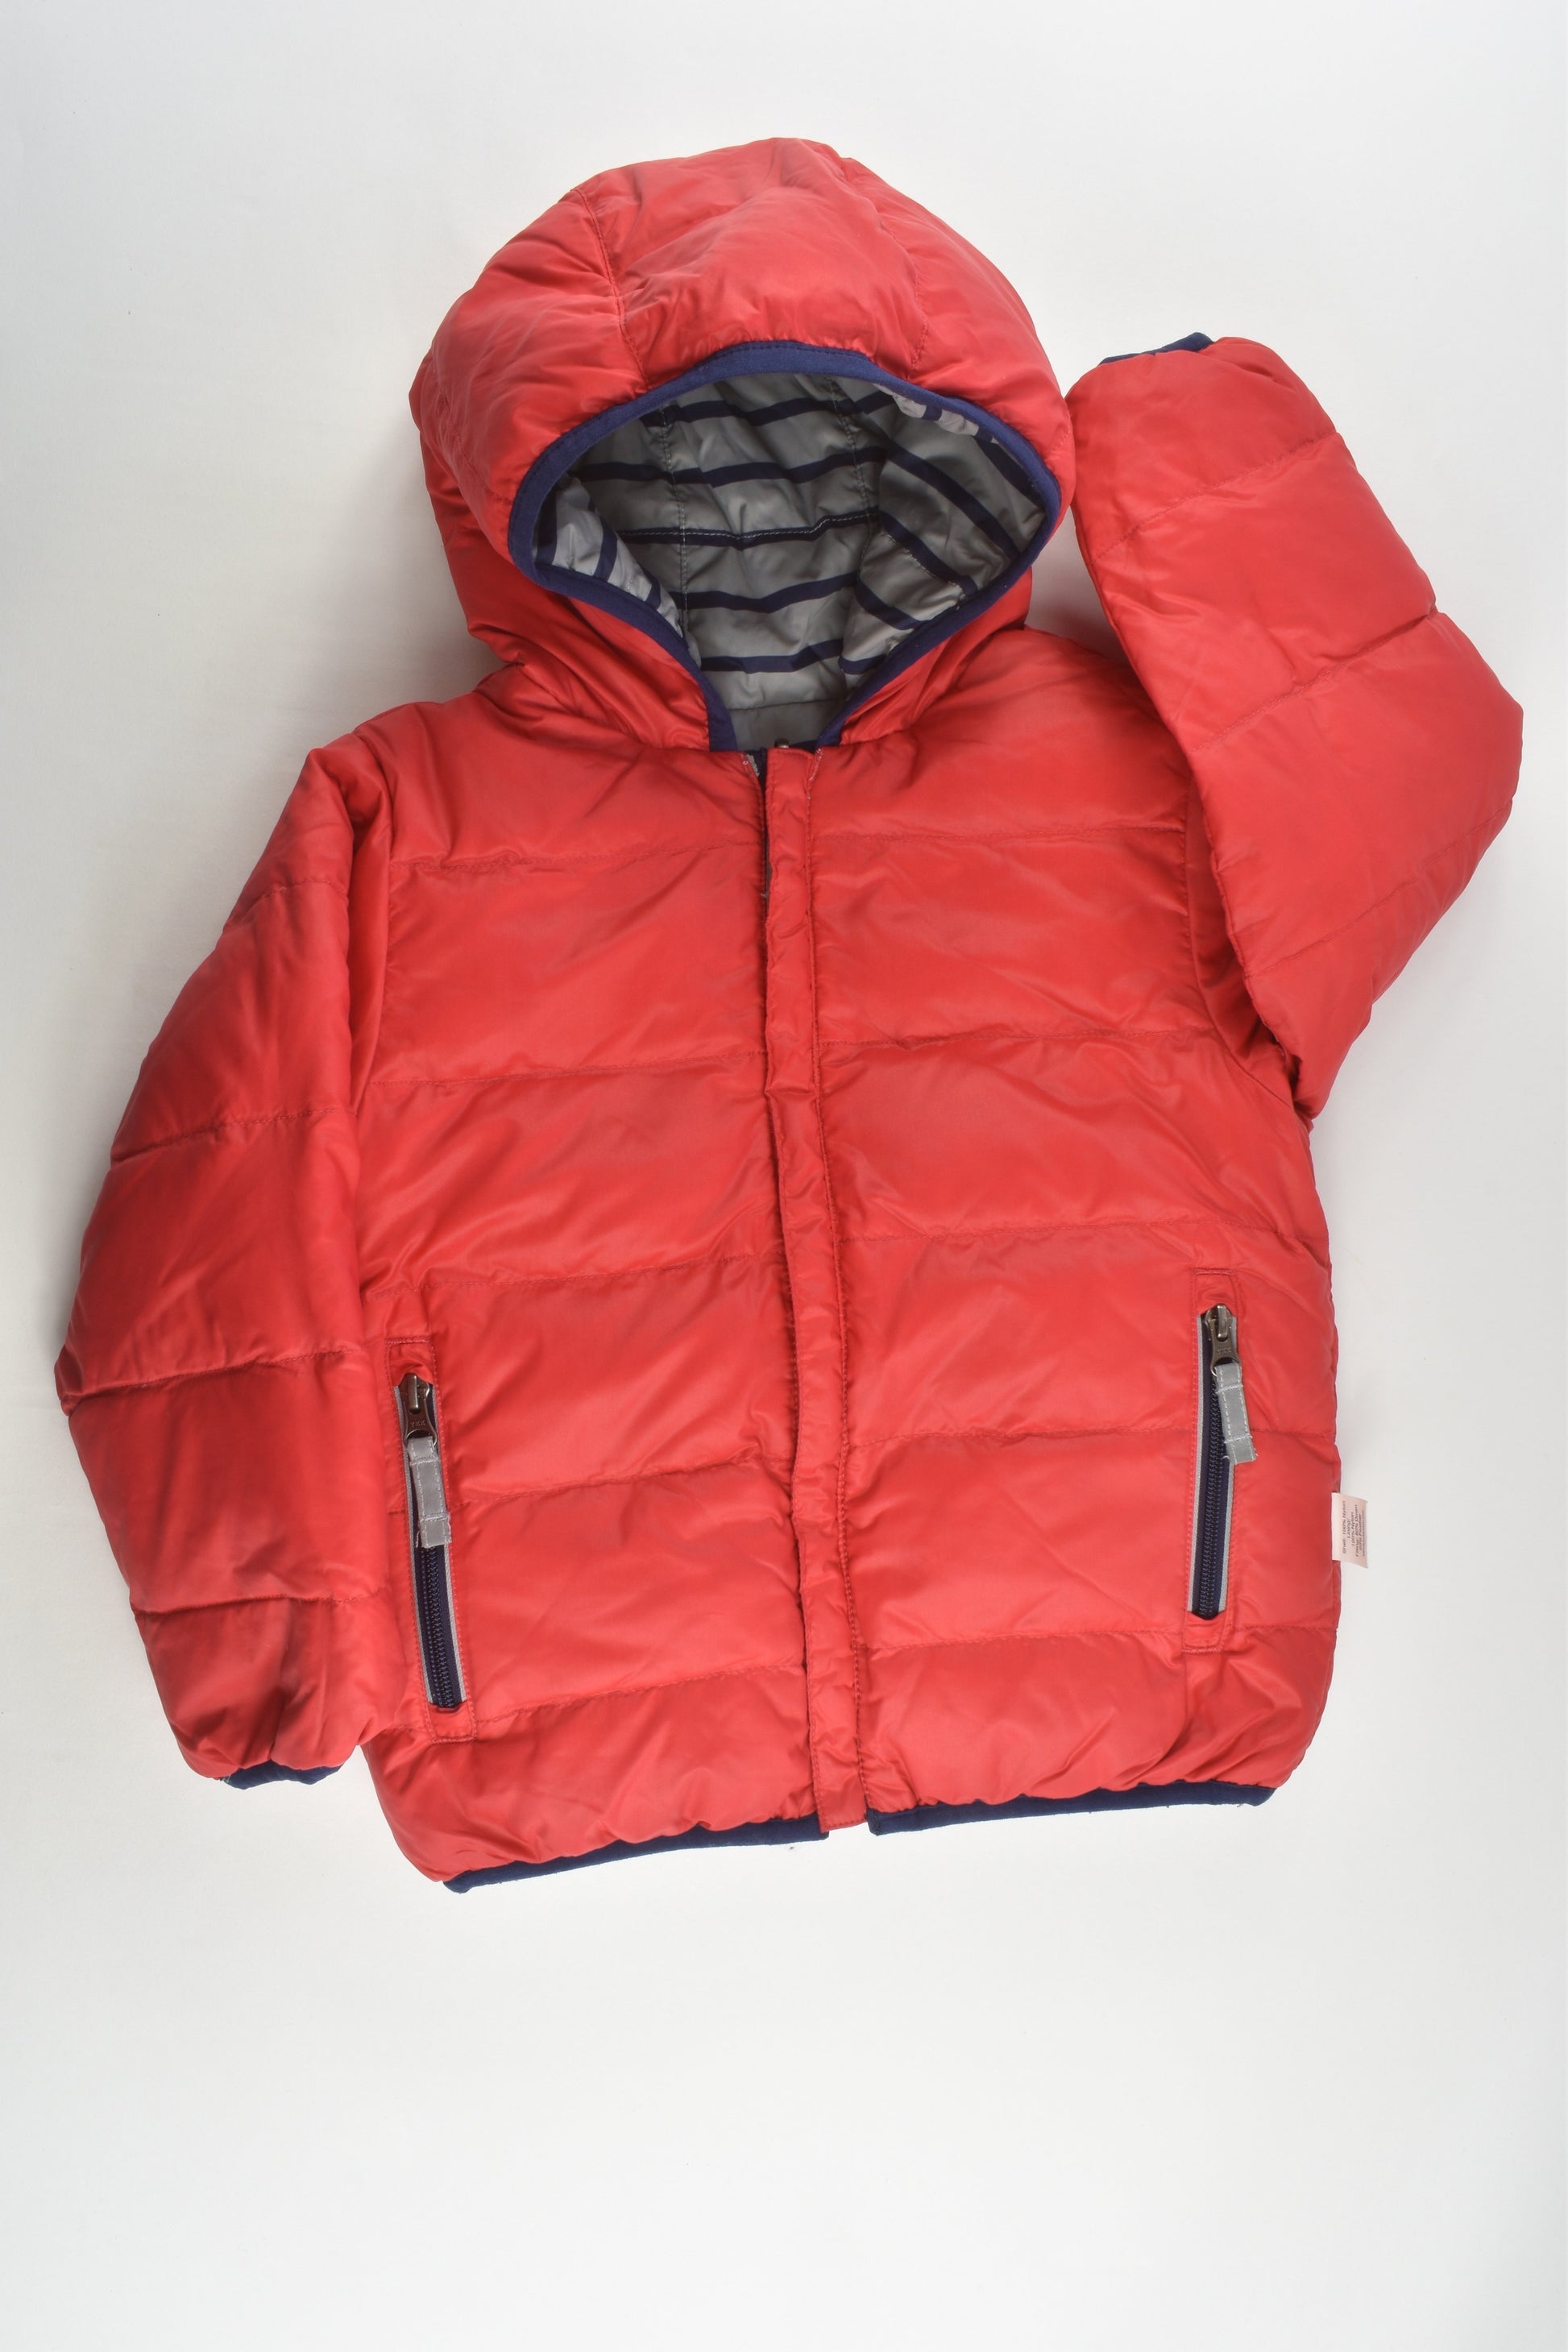 Hanna Andersson Size 2-3 (100 cm) Reversible Down/Feather Puffer Jacket